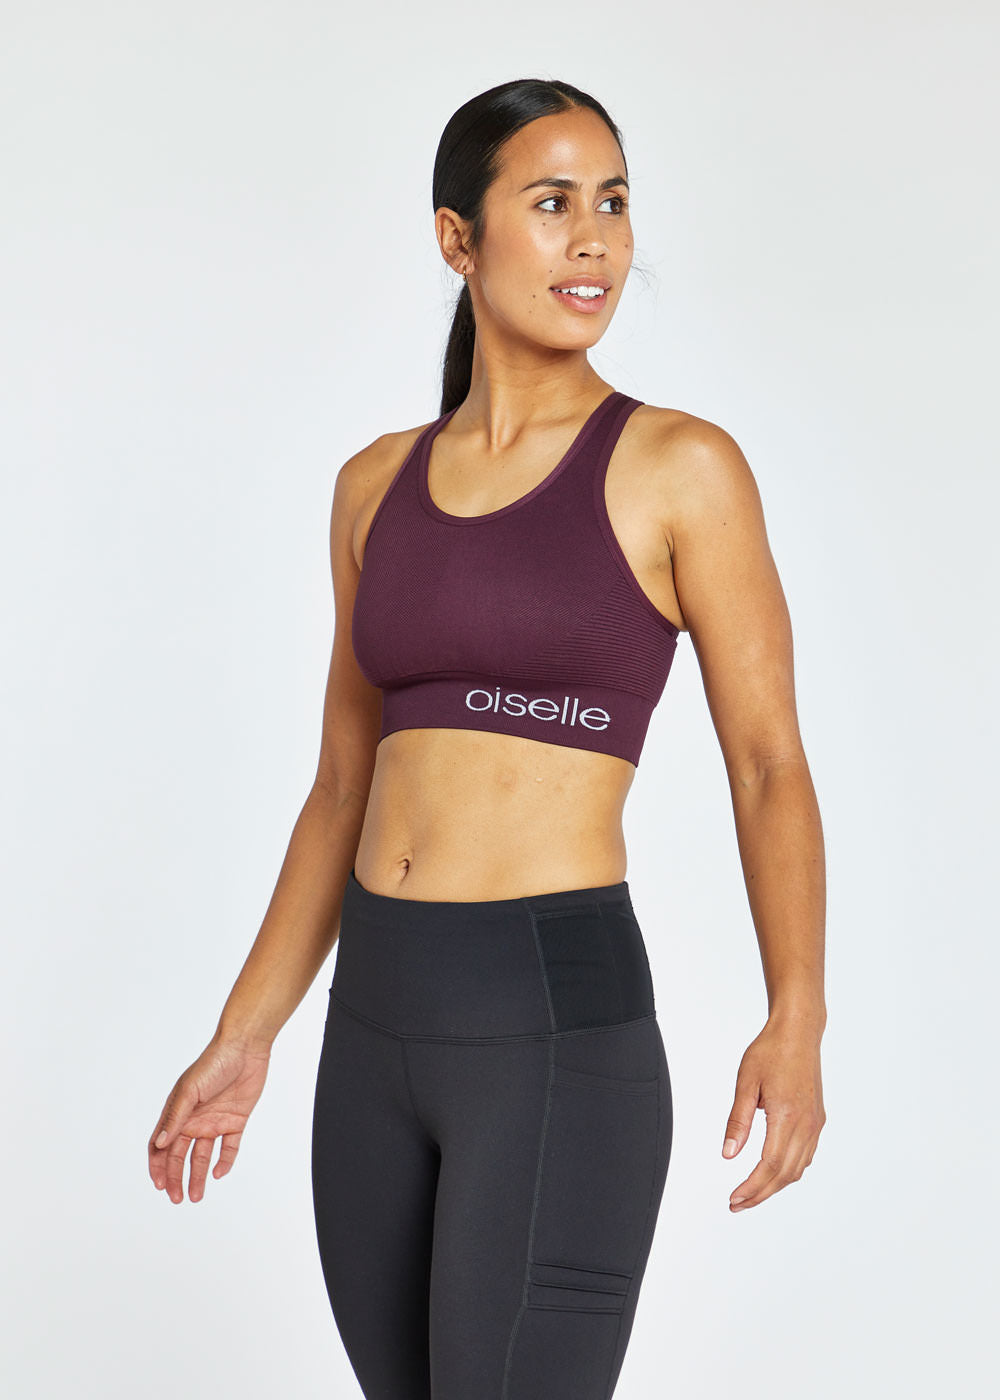 New Bras Out Front! Meet Our Spring 18 Sports Bra Collection – OISELLE